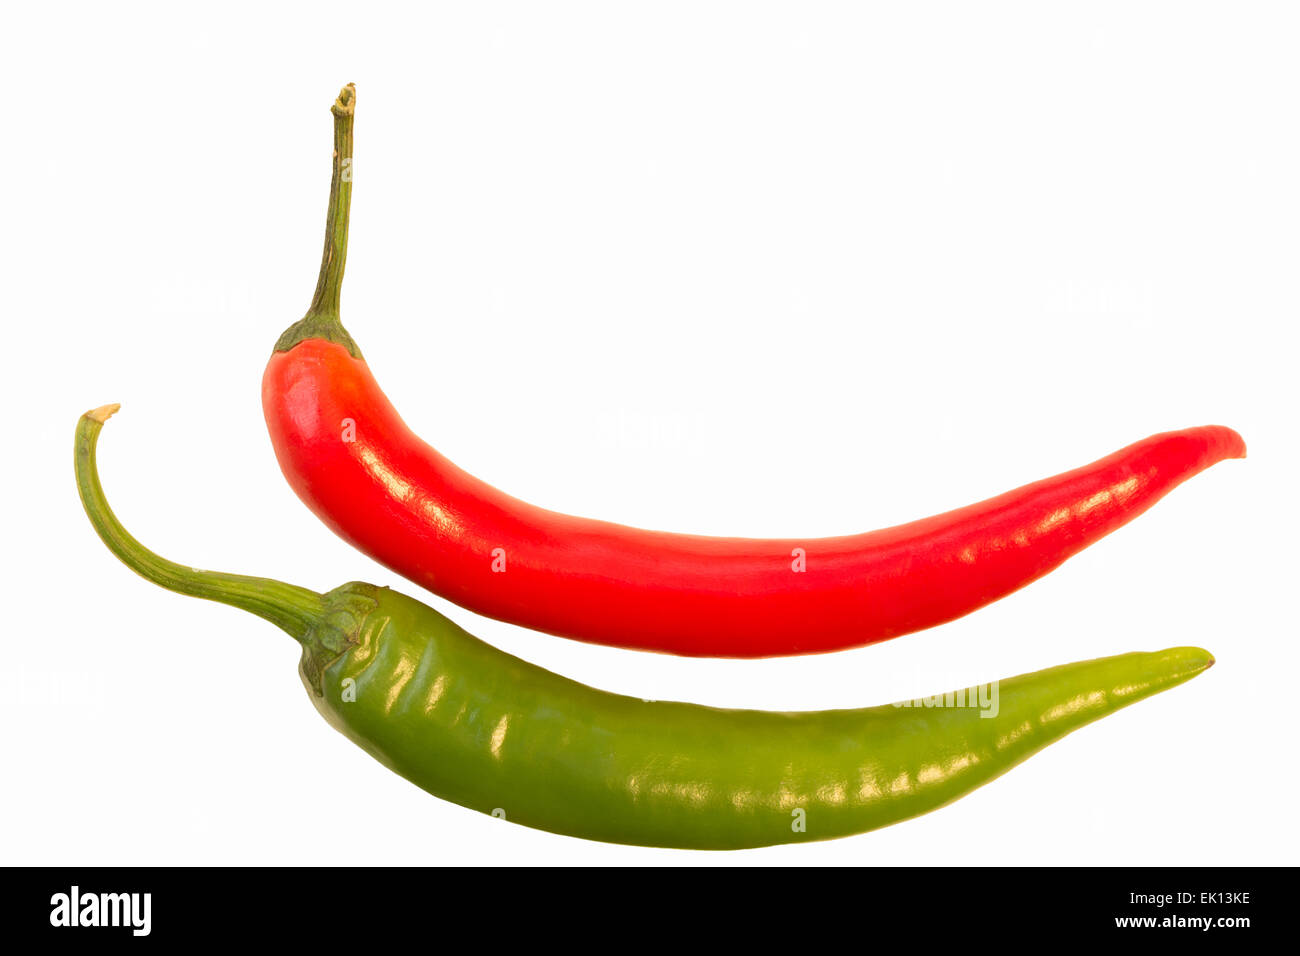 Closeup of a whole red and green chili (Capsicum annuum) isolated on white background Stock Photo